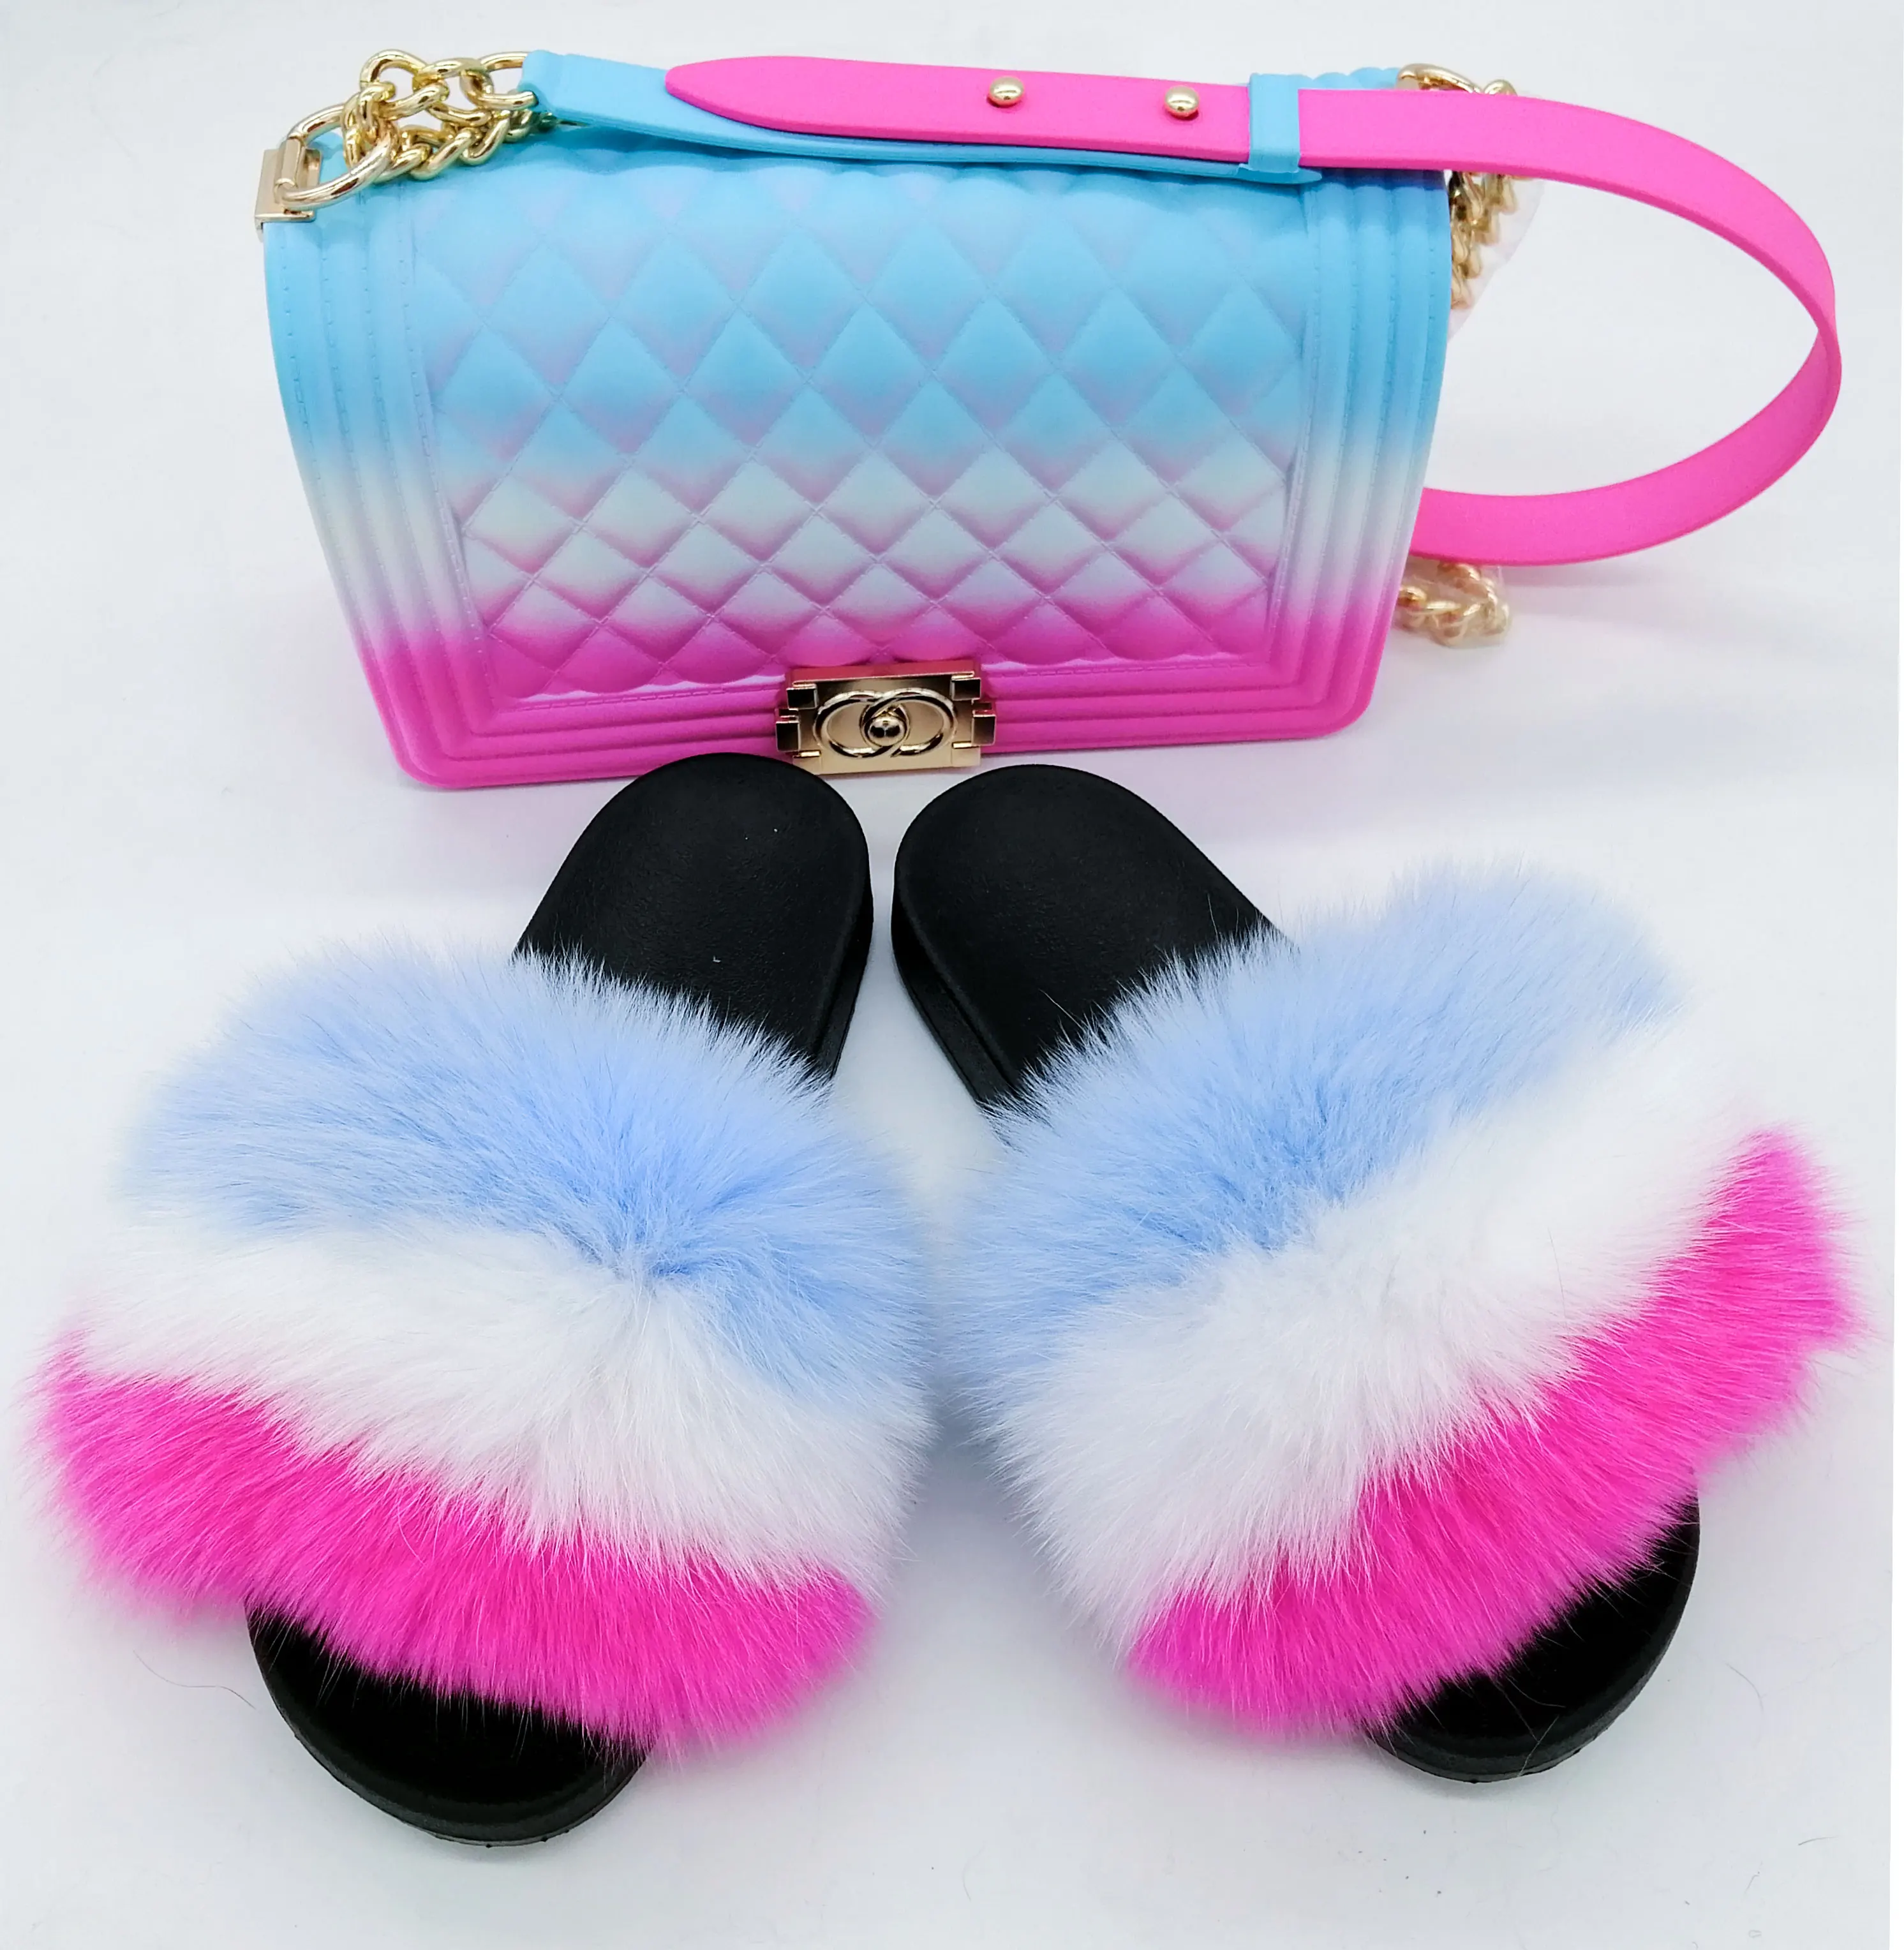 

2019 Fashion luxury chain rainbow purse lady colorful bags candy jelly hand bags with real fox fur slides set, Customized color